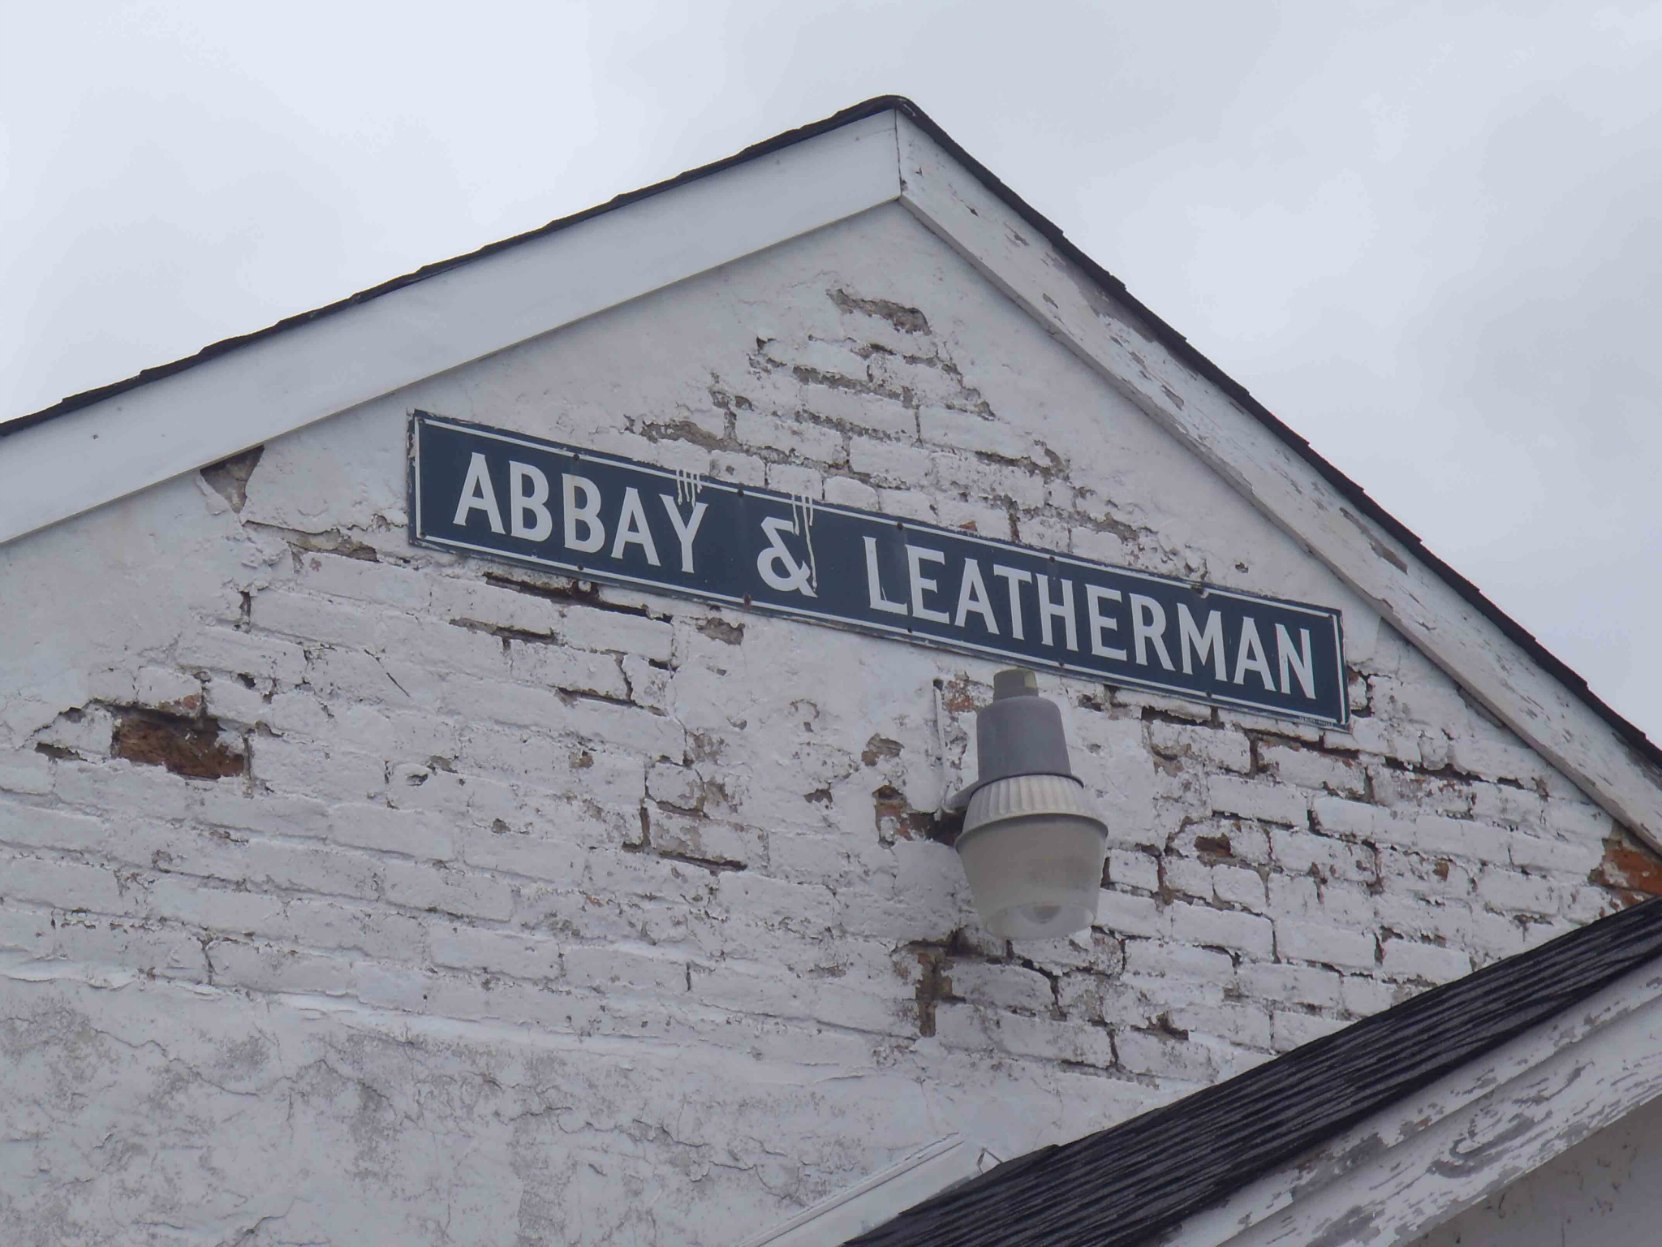 Abbay & Leatherman sign on plantation commissary building, Tunica County, Mississippi